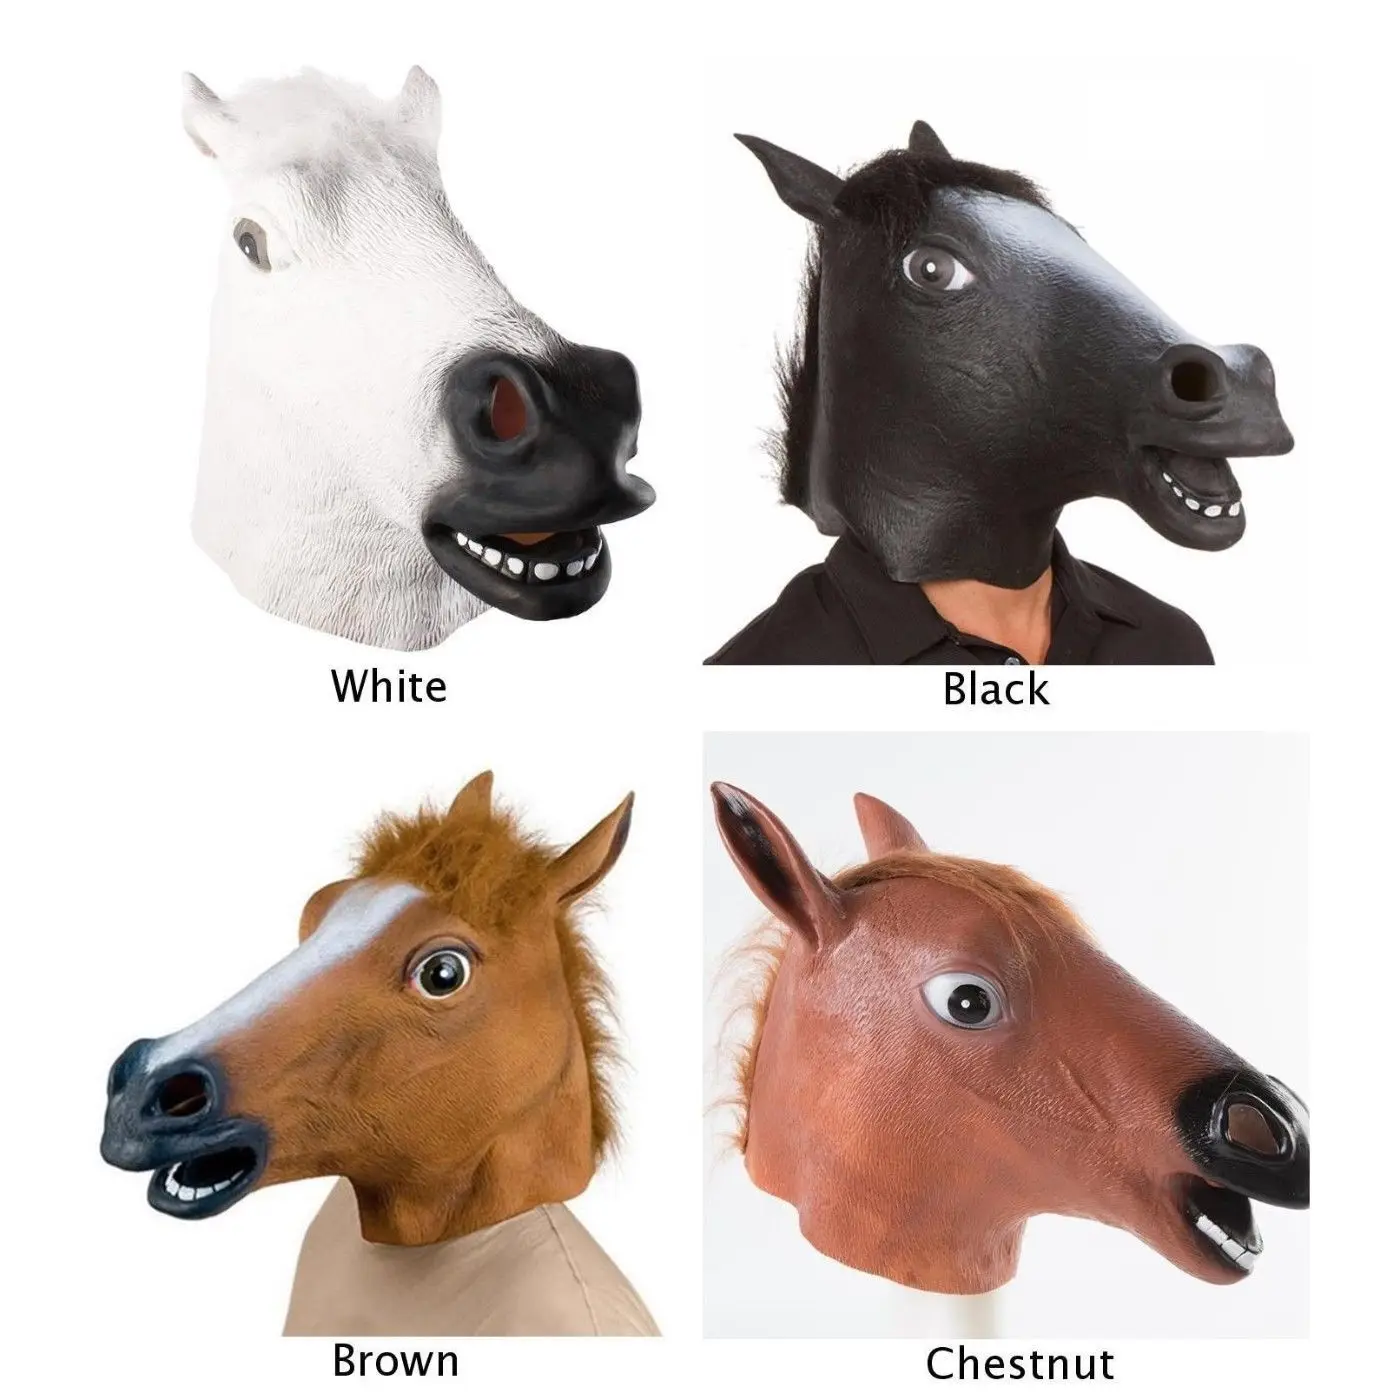 

Cosmask Brown Horsehead Mask Cosplay Halloween Mask Horseshoe Suit Latex Mask Horror Mask Full Face Horse Headgear Party Mask